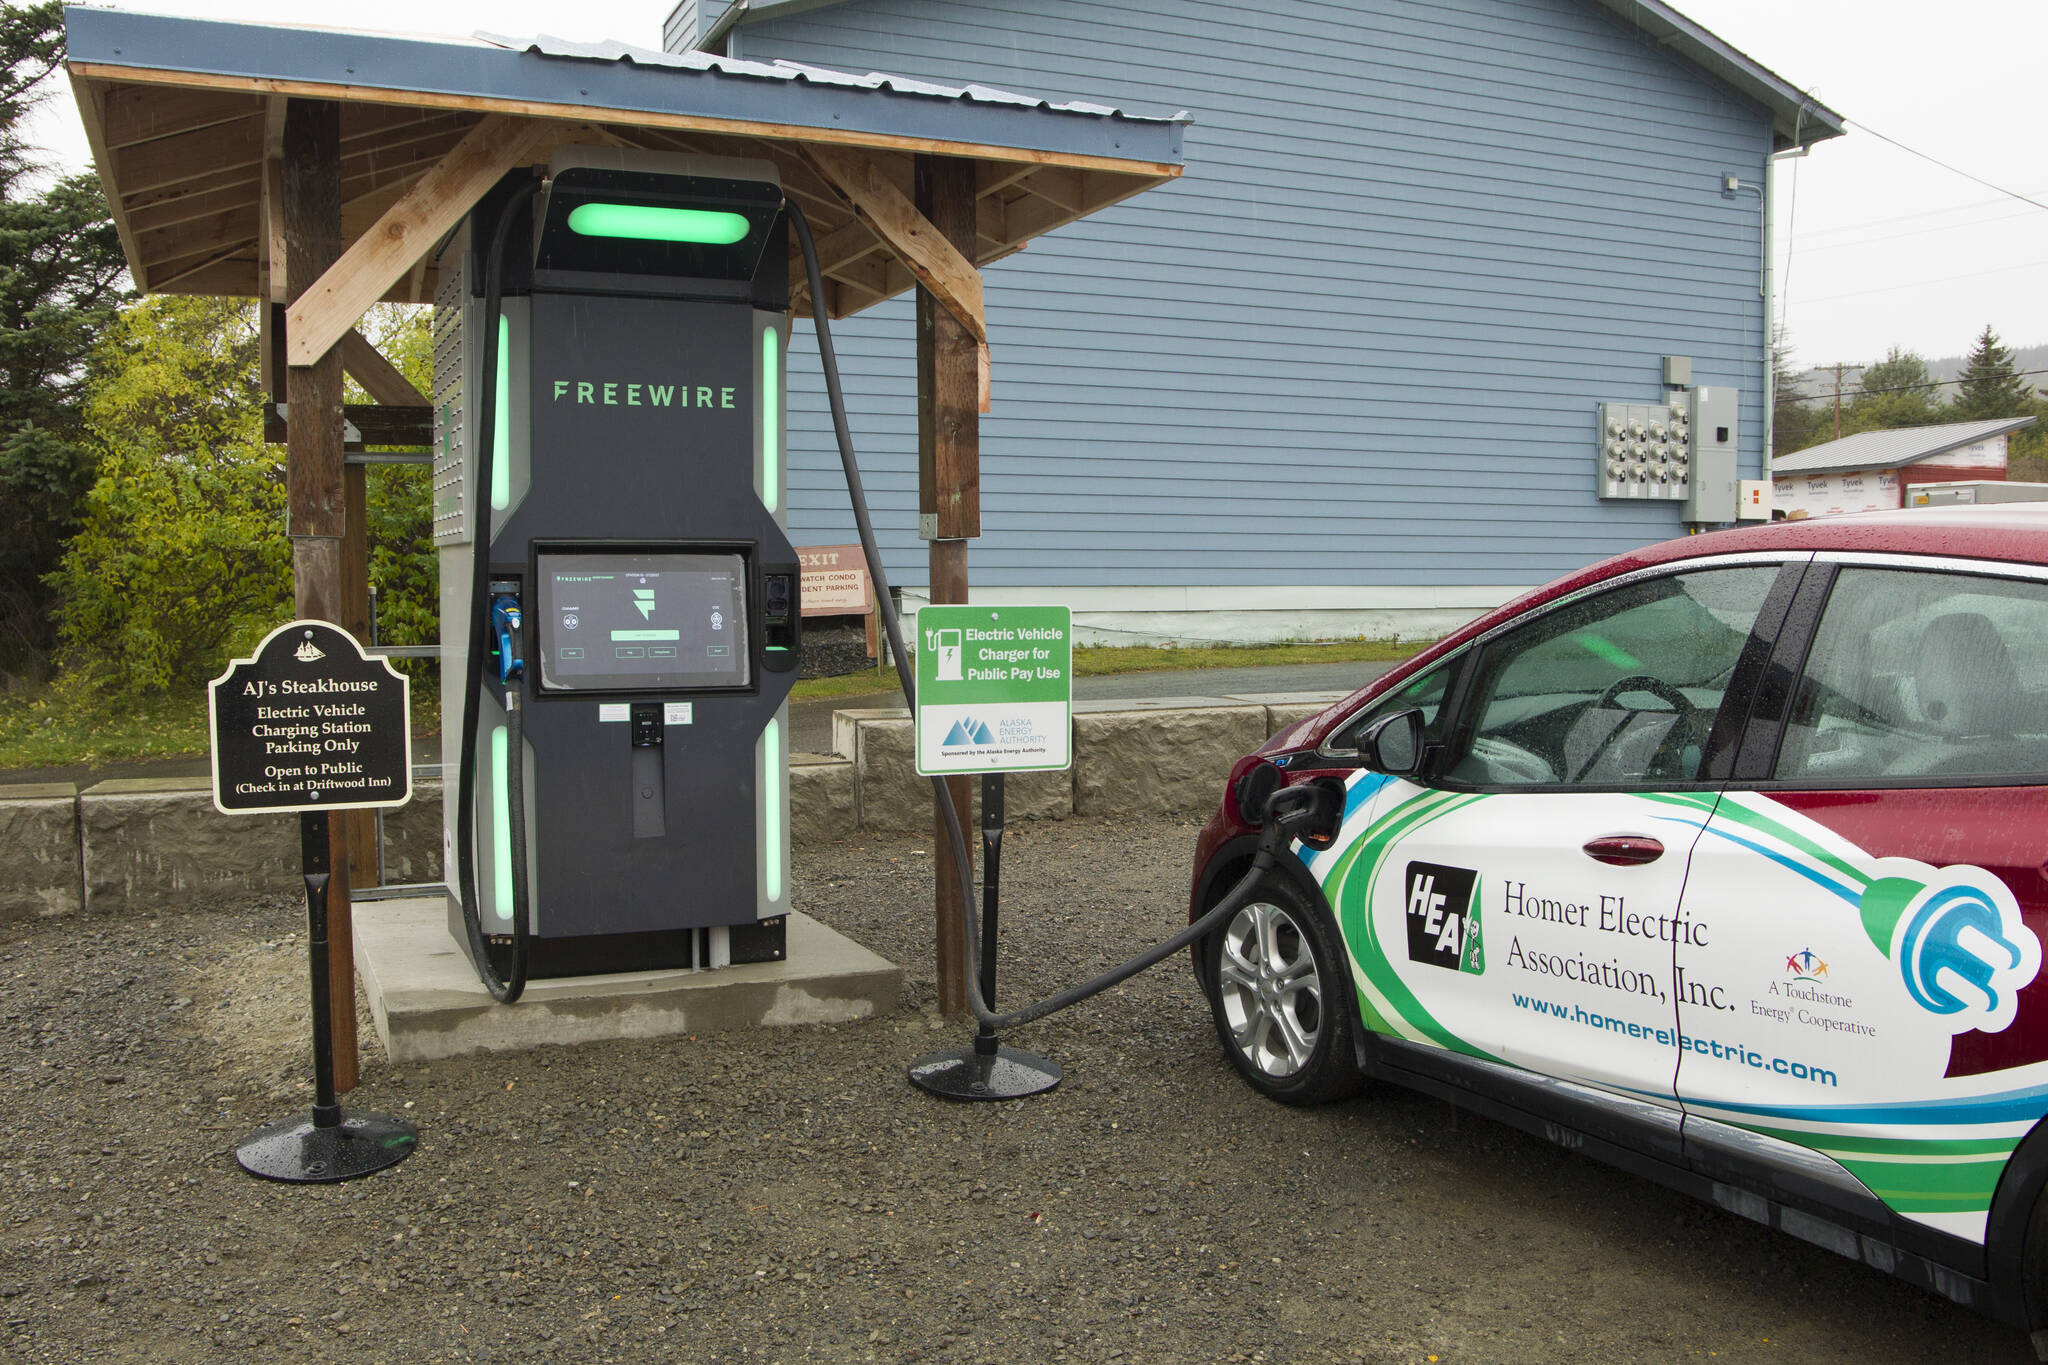 The very first FreeWire ultrafast Electric Vehicle charger in Alaska was installed at AJ’s Steakhouse last week. The charging station is the first of nine EV charging stations that will connect Homer to Fairbanks. (Photo by Sarah Knapp/Homer News)